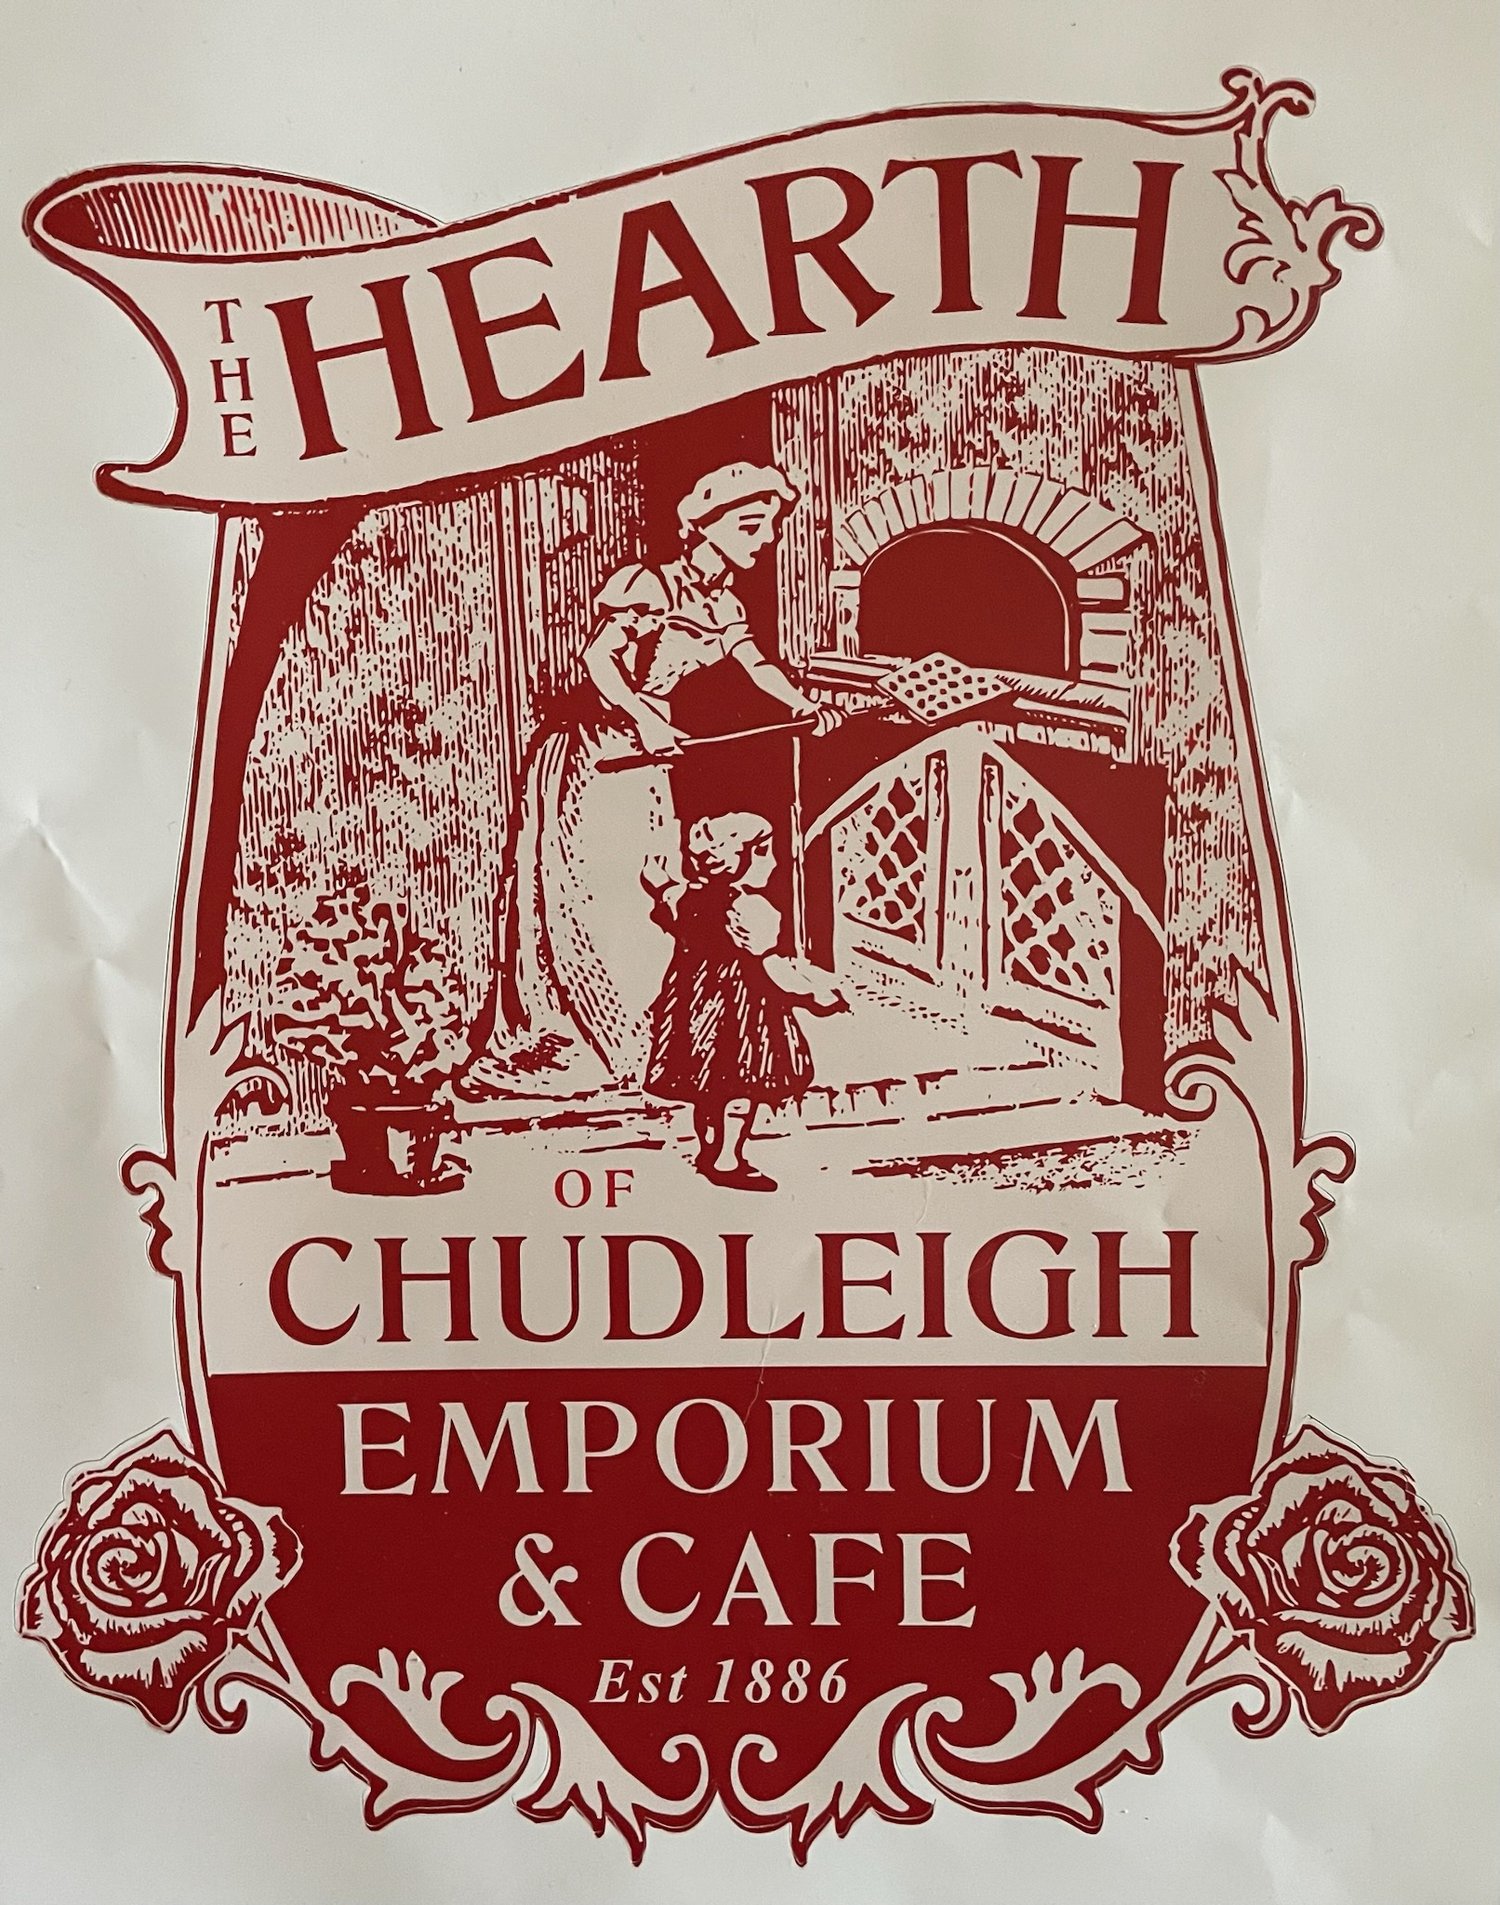 The Hearth Of Chudleigh